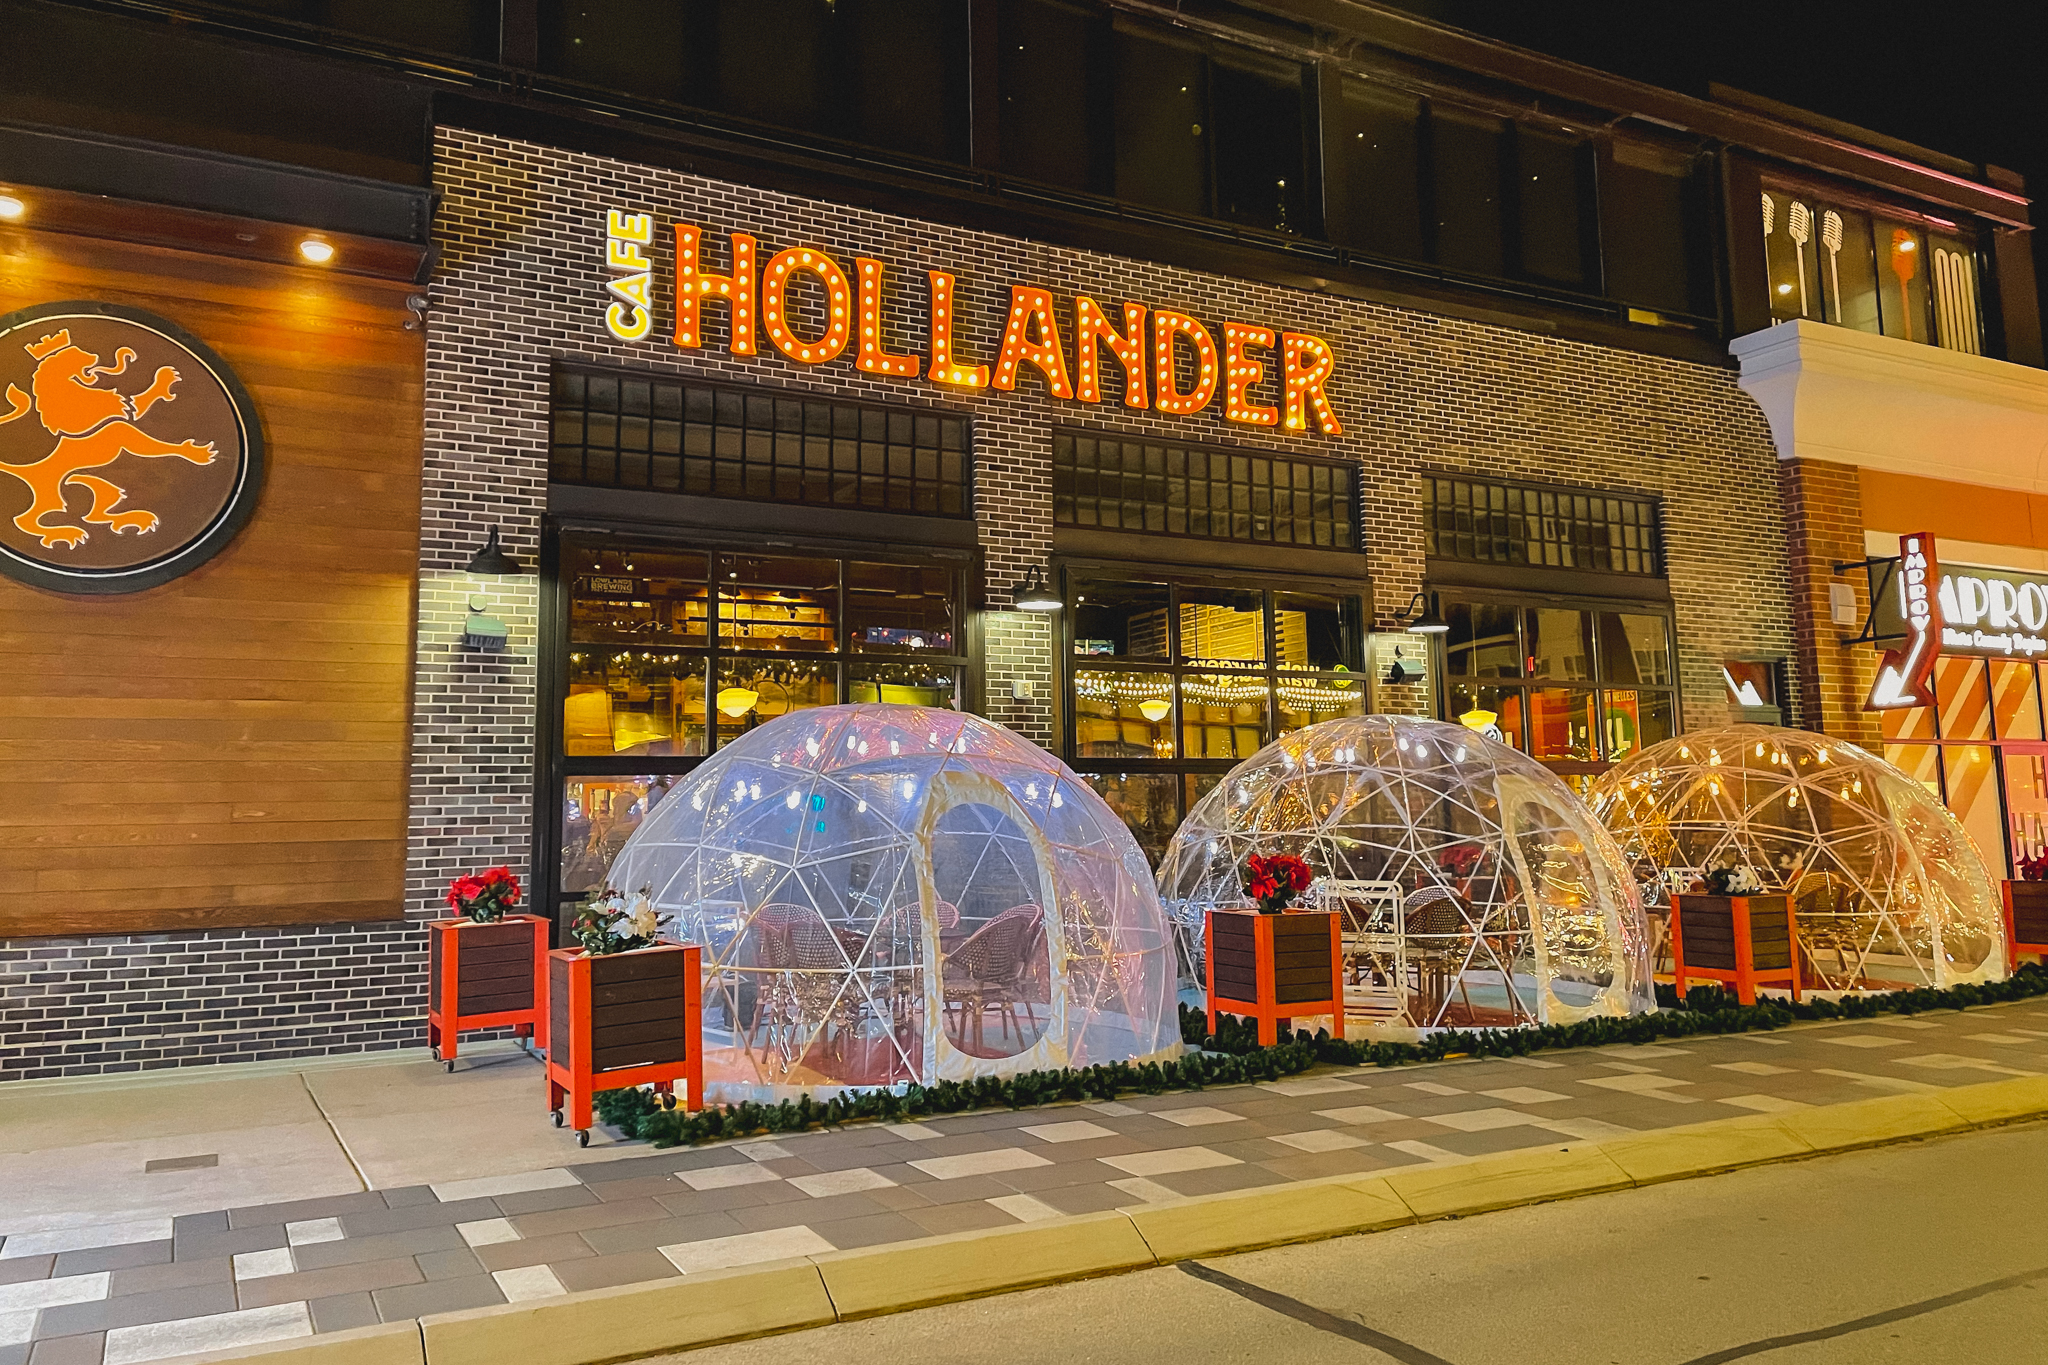 Café Hollander Brookfield's outdoor dining domes lit up with festive colors